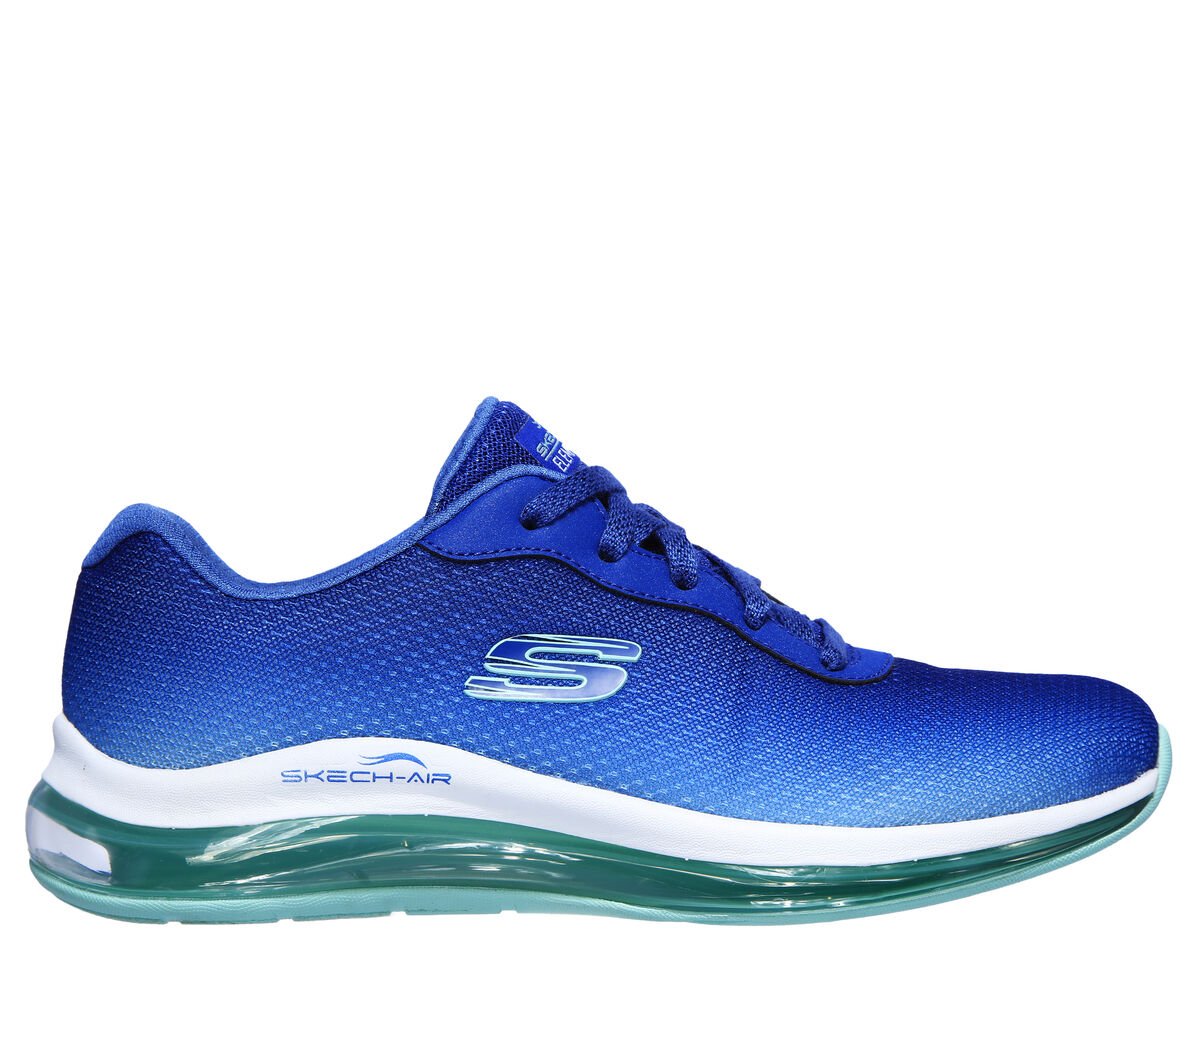 Prominente personalidad Casarse Skech-Air Element 2.0 | SKECHERS